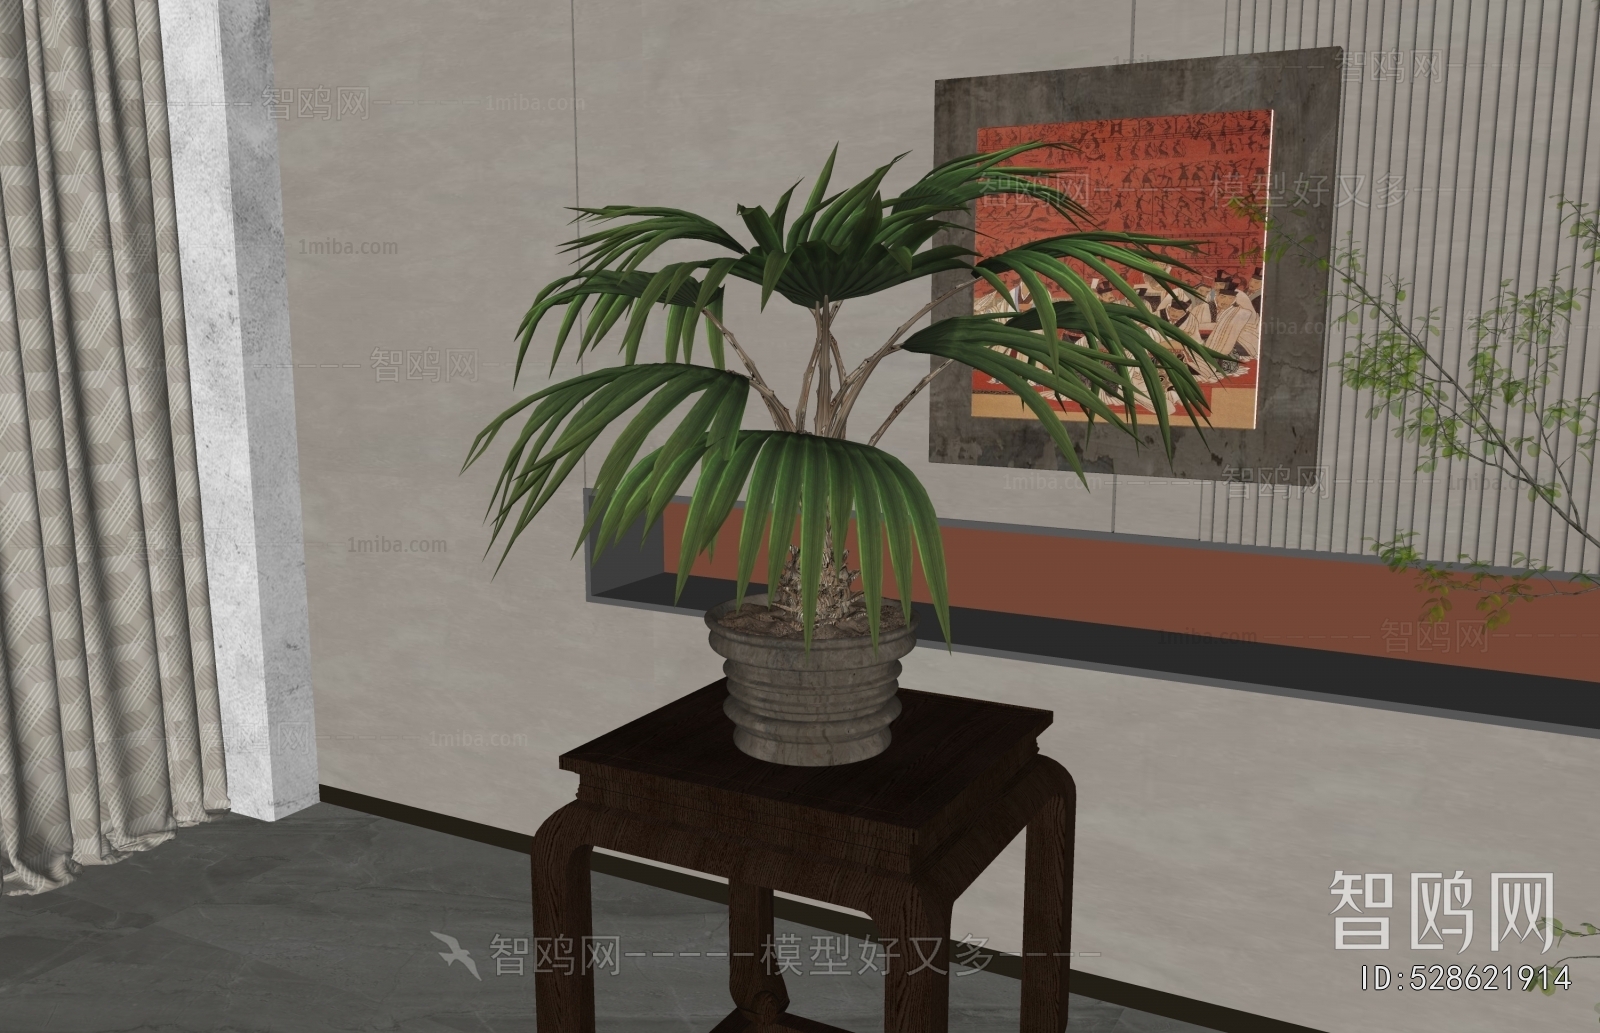 New Chinese Style Desktop Plant